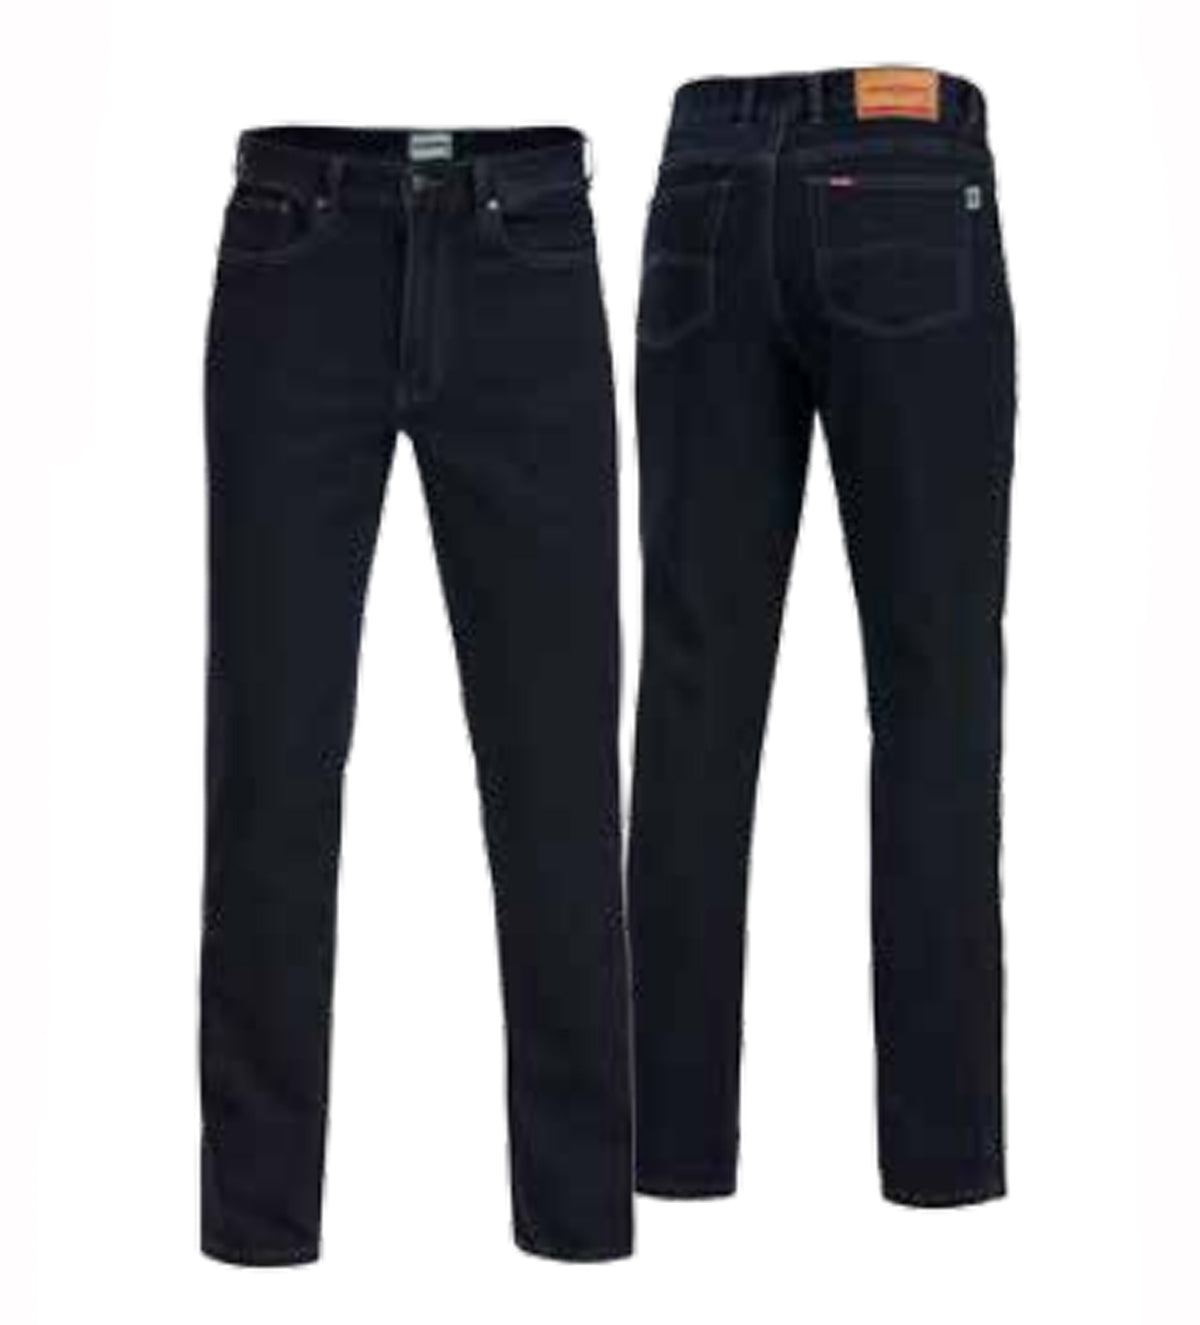 Mustang Stretch Jeans - Blue_Black